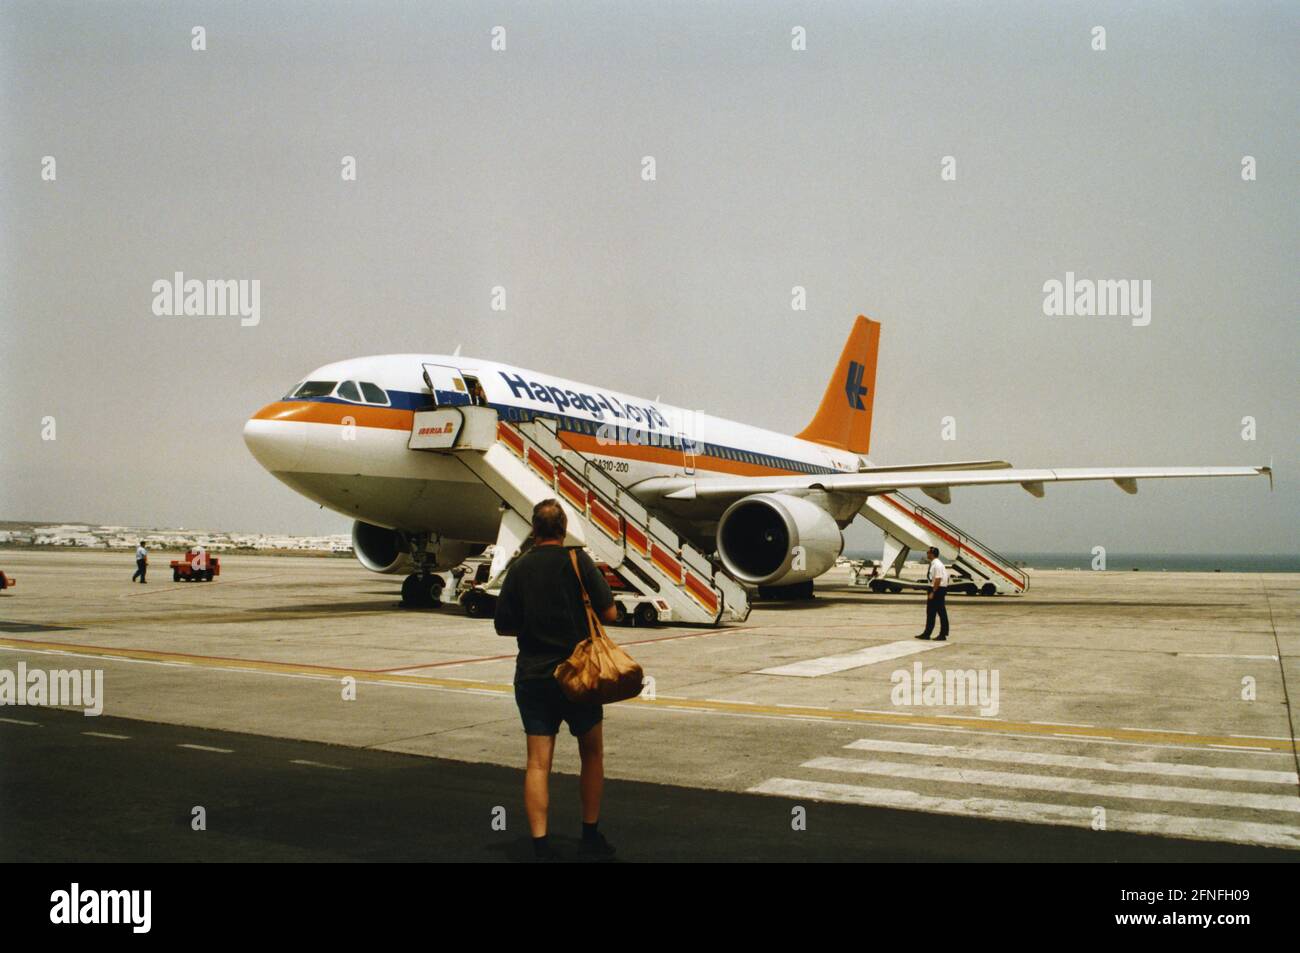 An Airbus A310-200 of the German airline Hapag-Lloyd flight on the apron of  Lanzarote airport. [automated translation] Stock Photo - Alamy